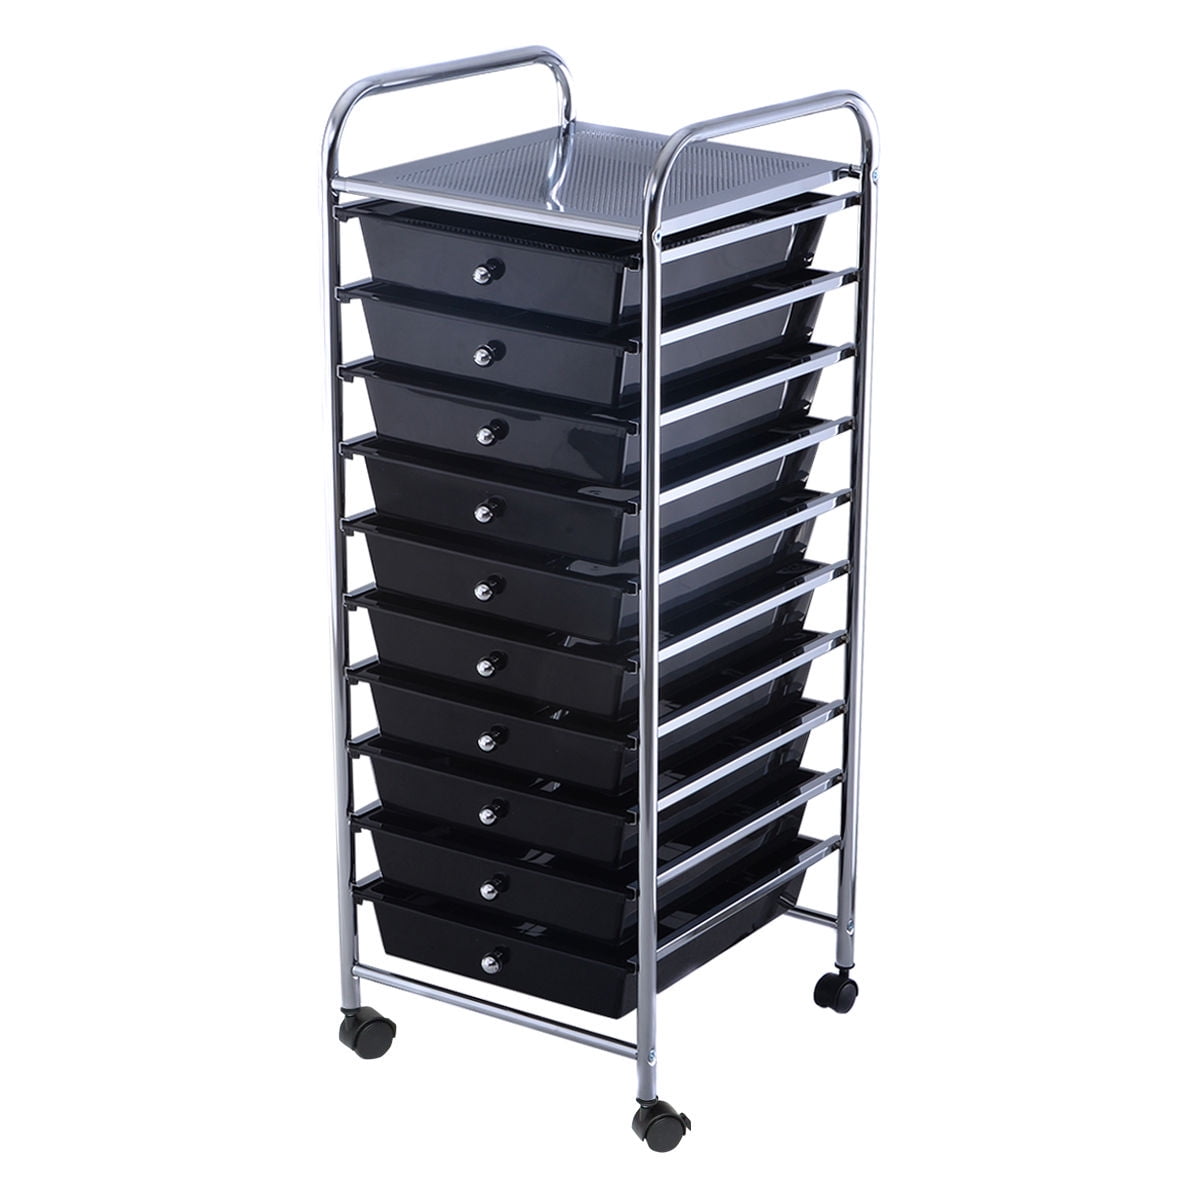 Black WELLFOR 10 Drawer Rolling Storage Cart Tools Scrapbook Stationery Mobile Rolling Storage with Tray Cart Office School Home Organizer 